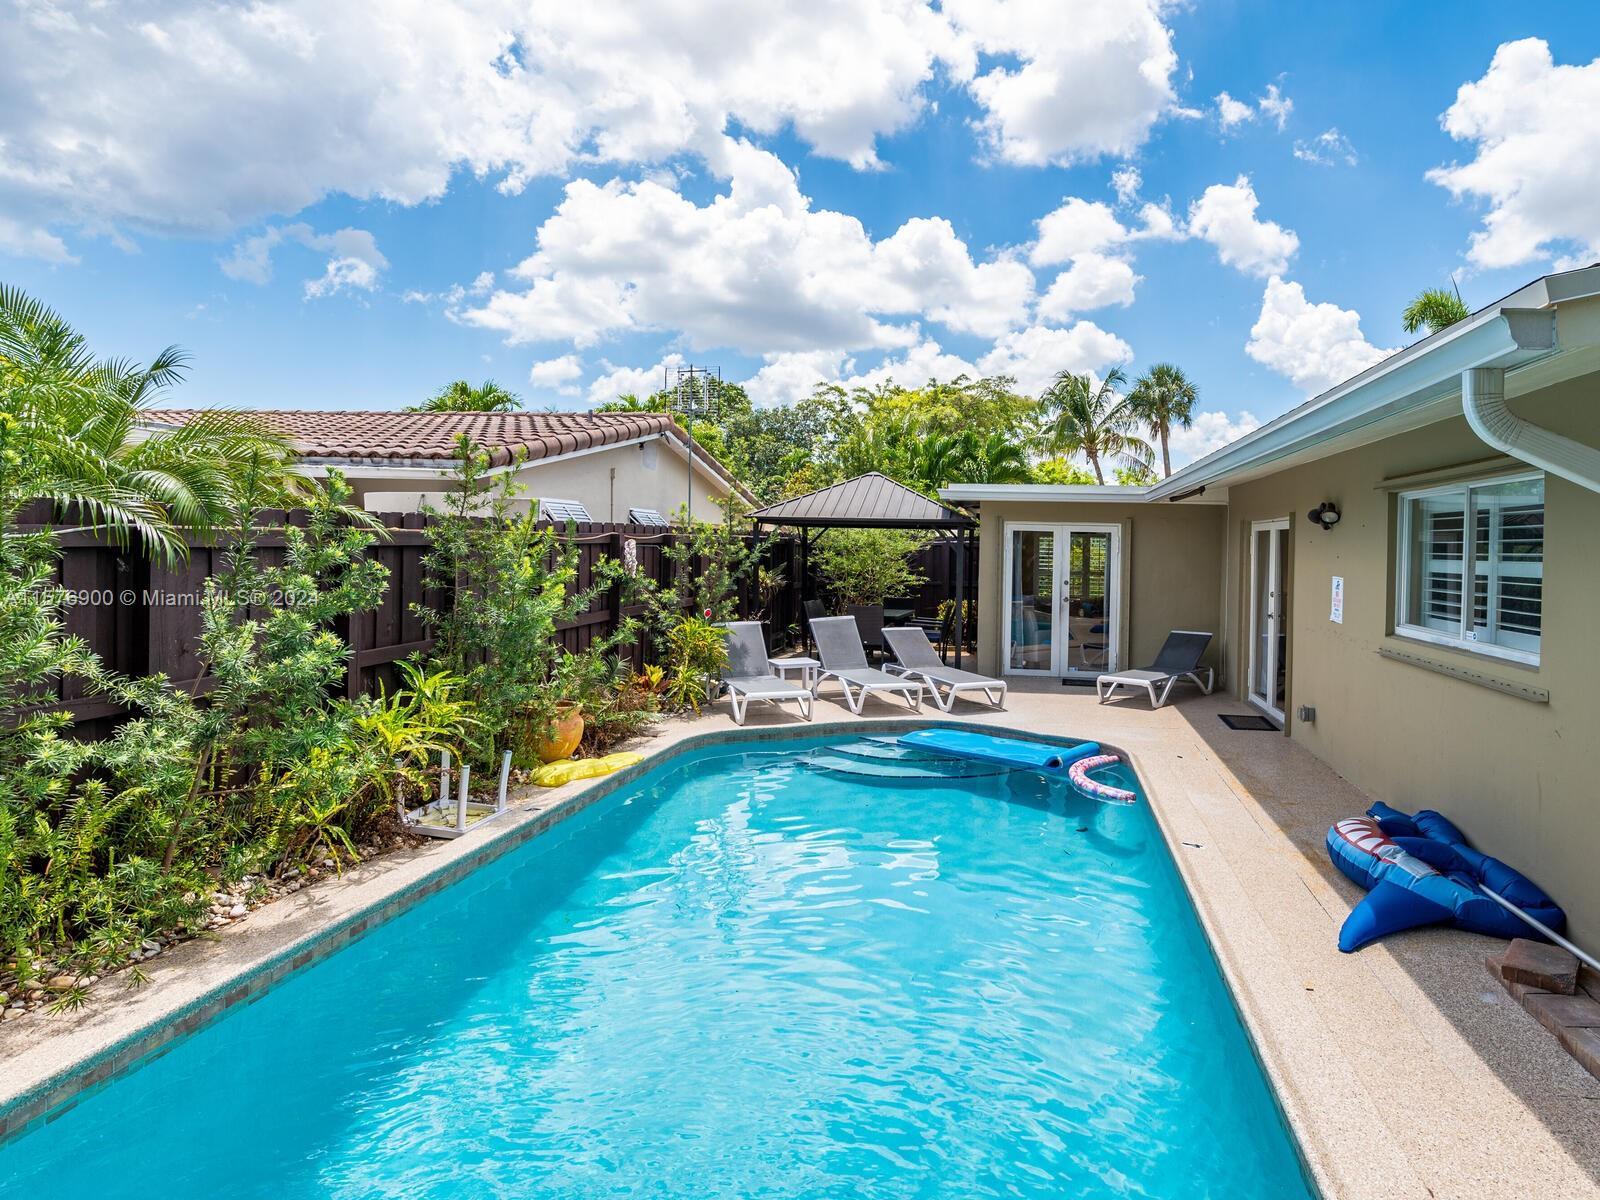 GORGEOUS 3 BED AND 2 BATH POOL HOME IN THE HEART OF WILTON MANORS. 
LIKE HAVING YOUR OWN LITTLE OAS